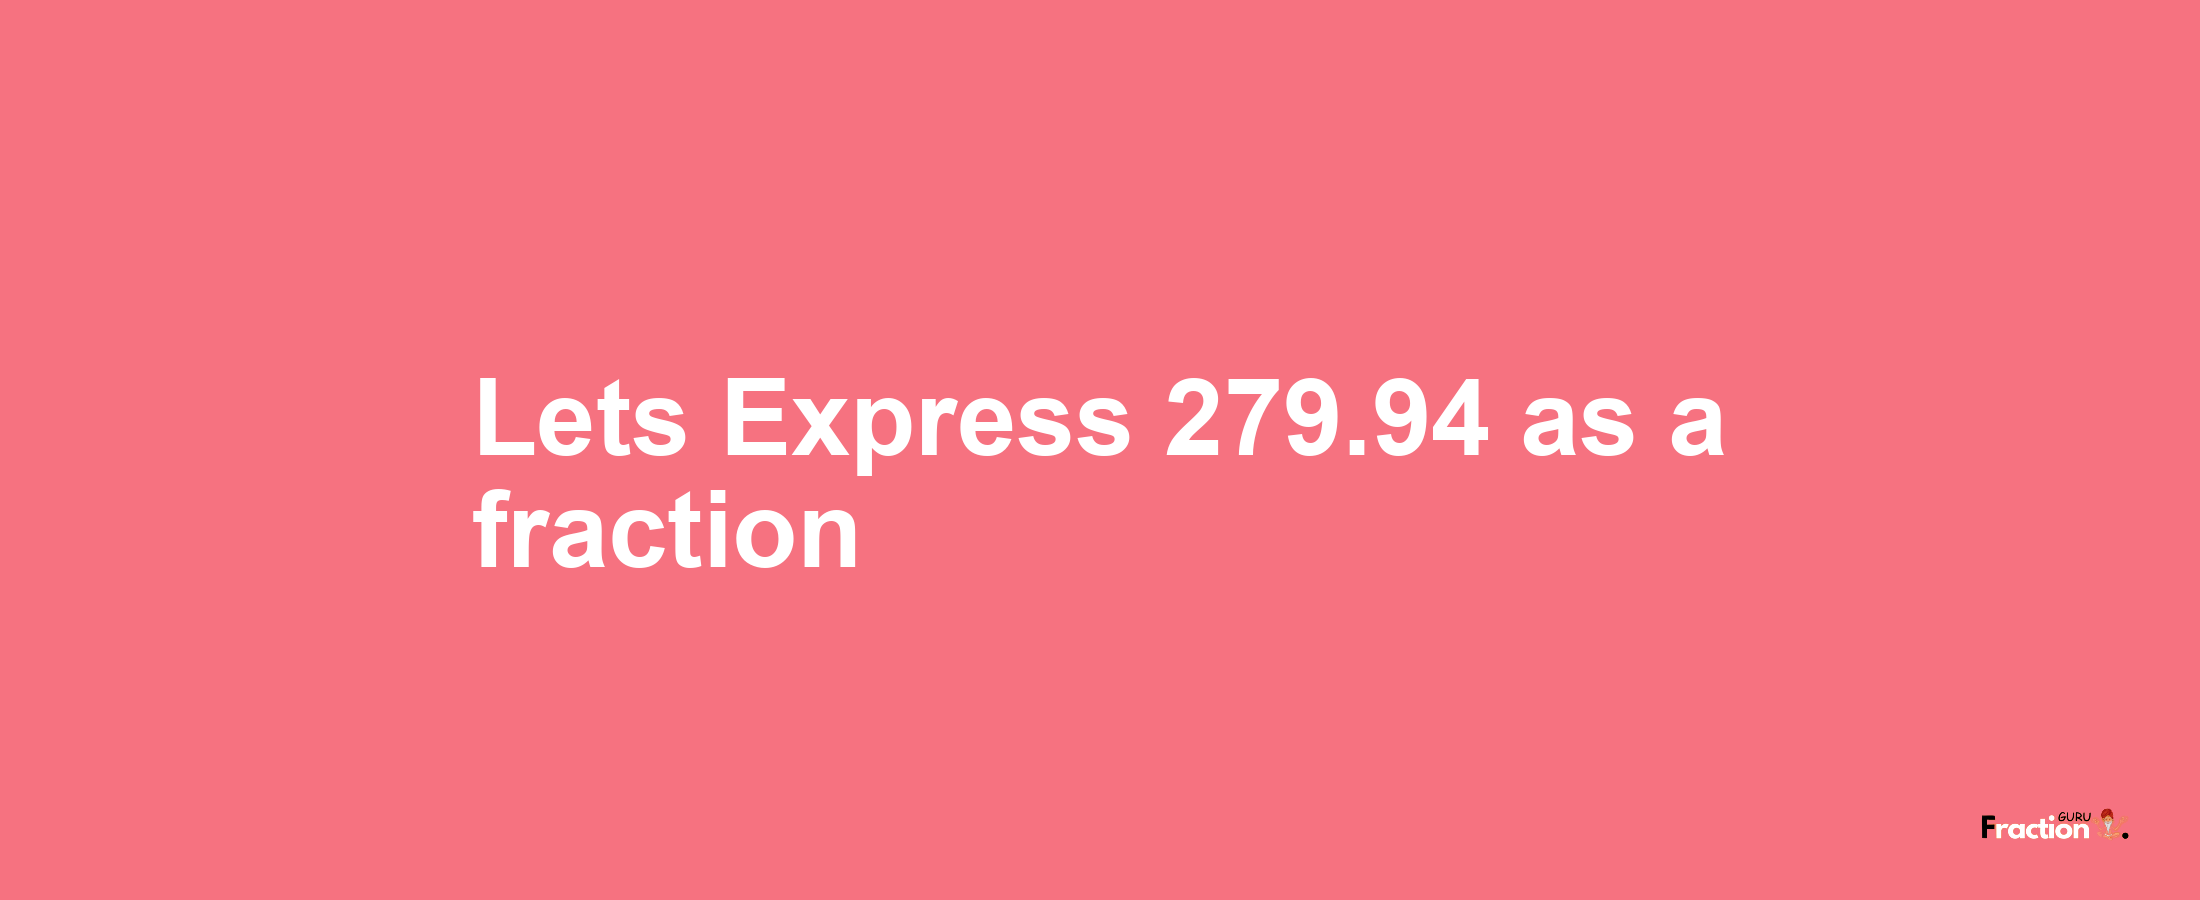 Lets Express 279.94 as afraction